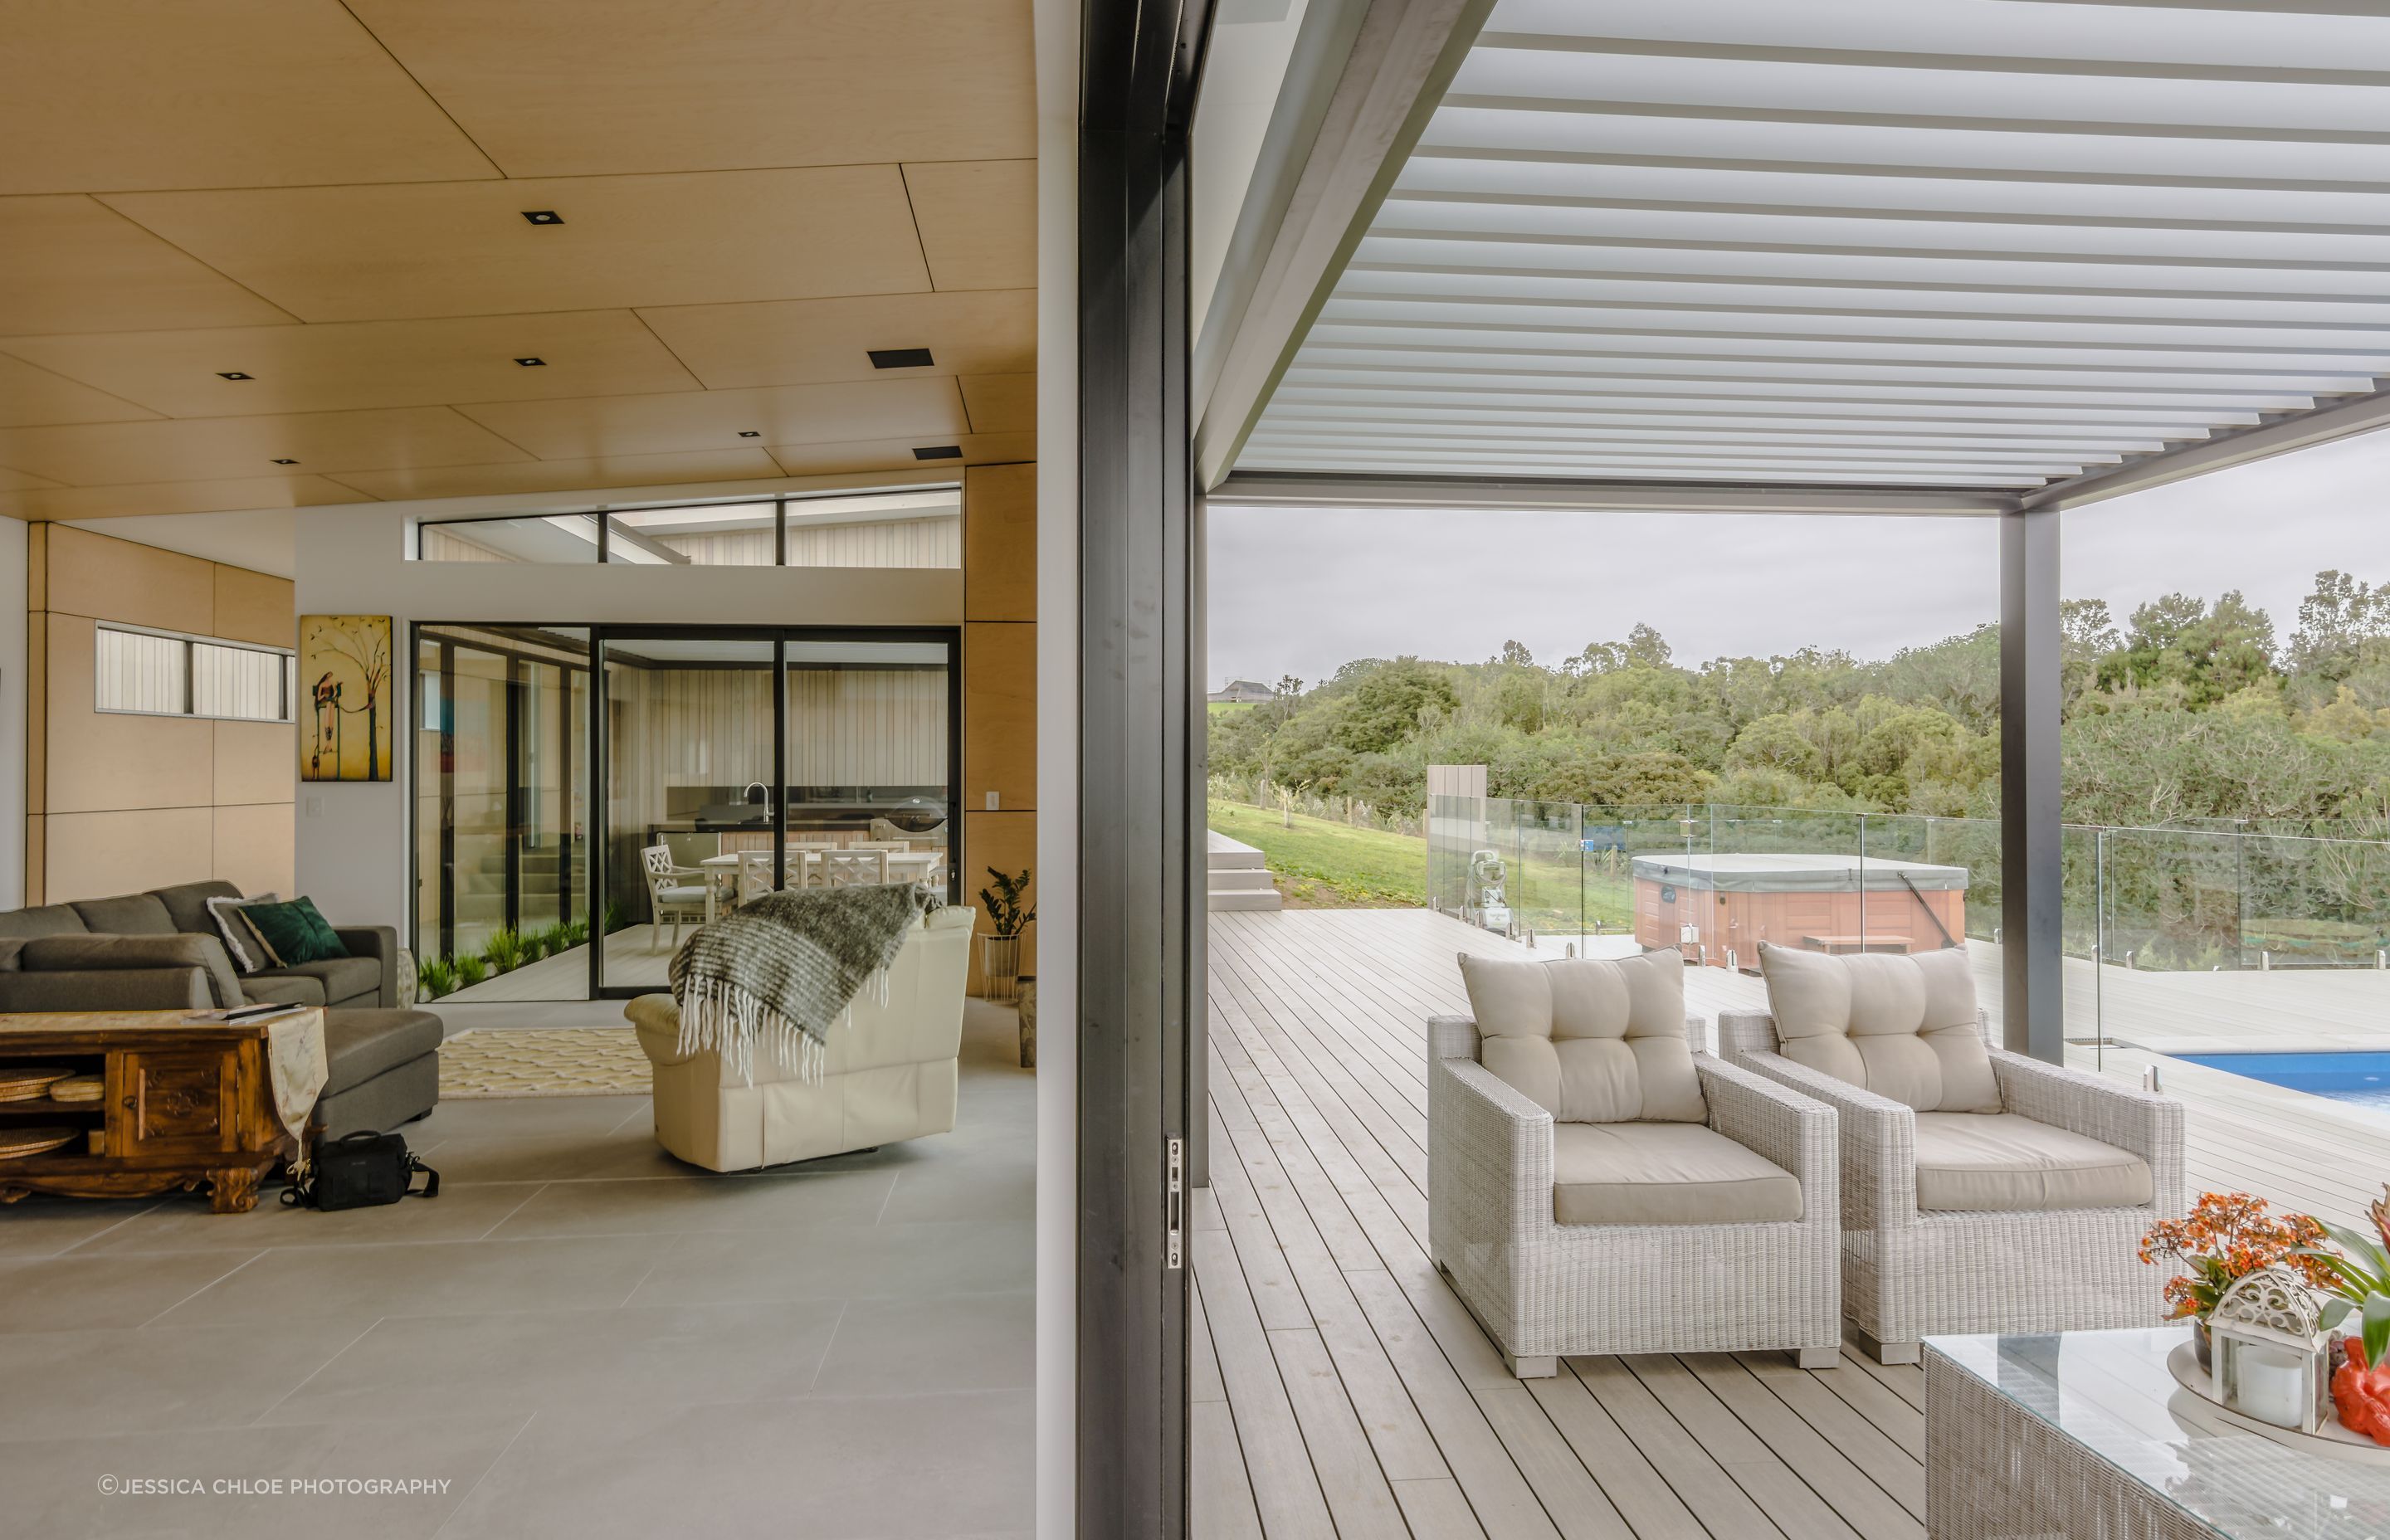 Blonded ply used extensively throughout the interior creates a relaxed easy going bach vibe, while the Louvretec Shade system seamlessly transitions between the interior and exterior.